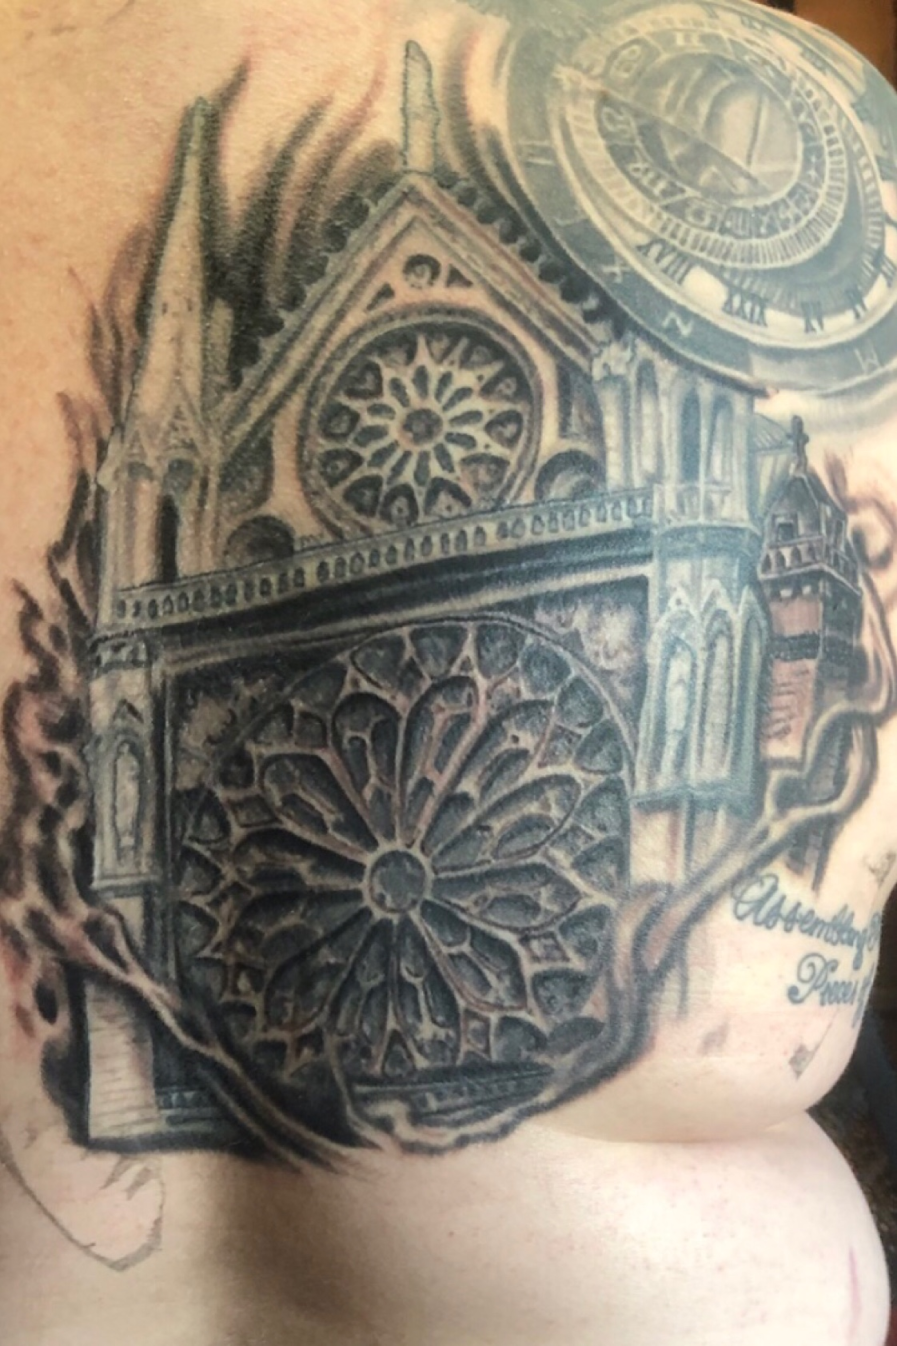 Tattoo uploaded by Noelle Vilt • This is my tattoo of Notre Dame